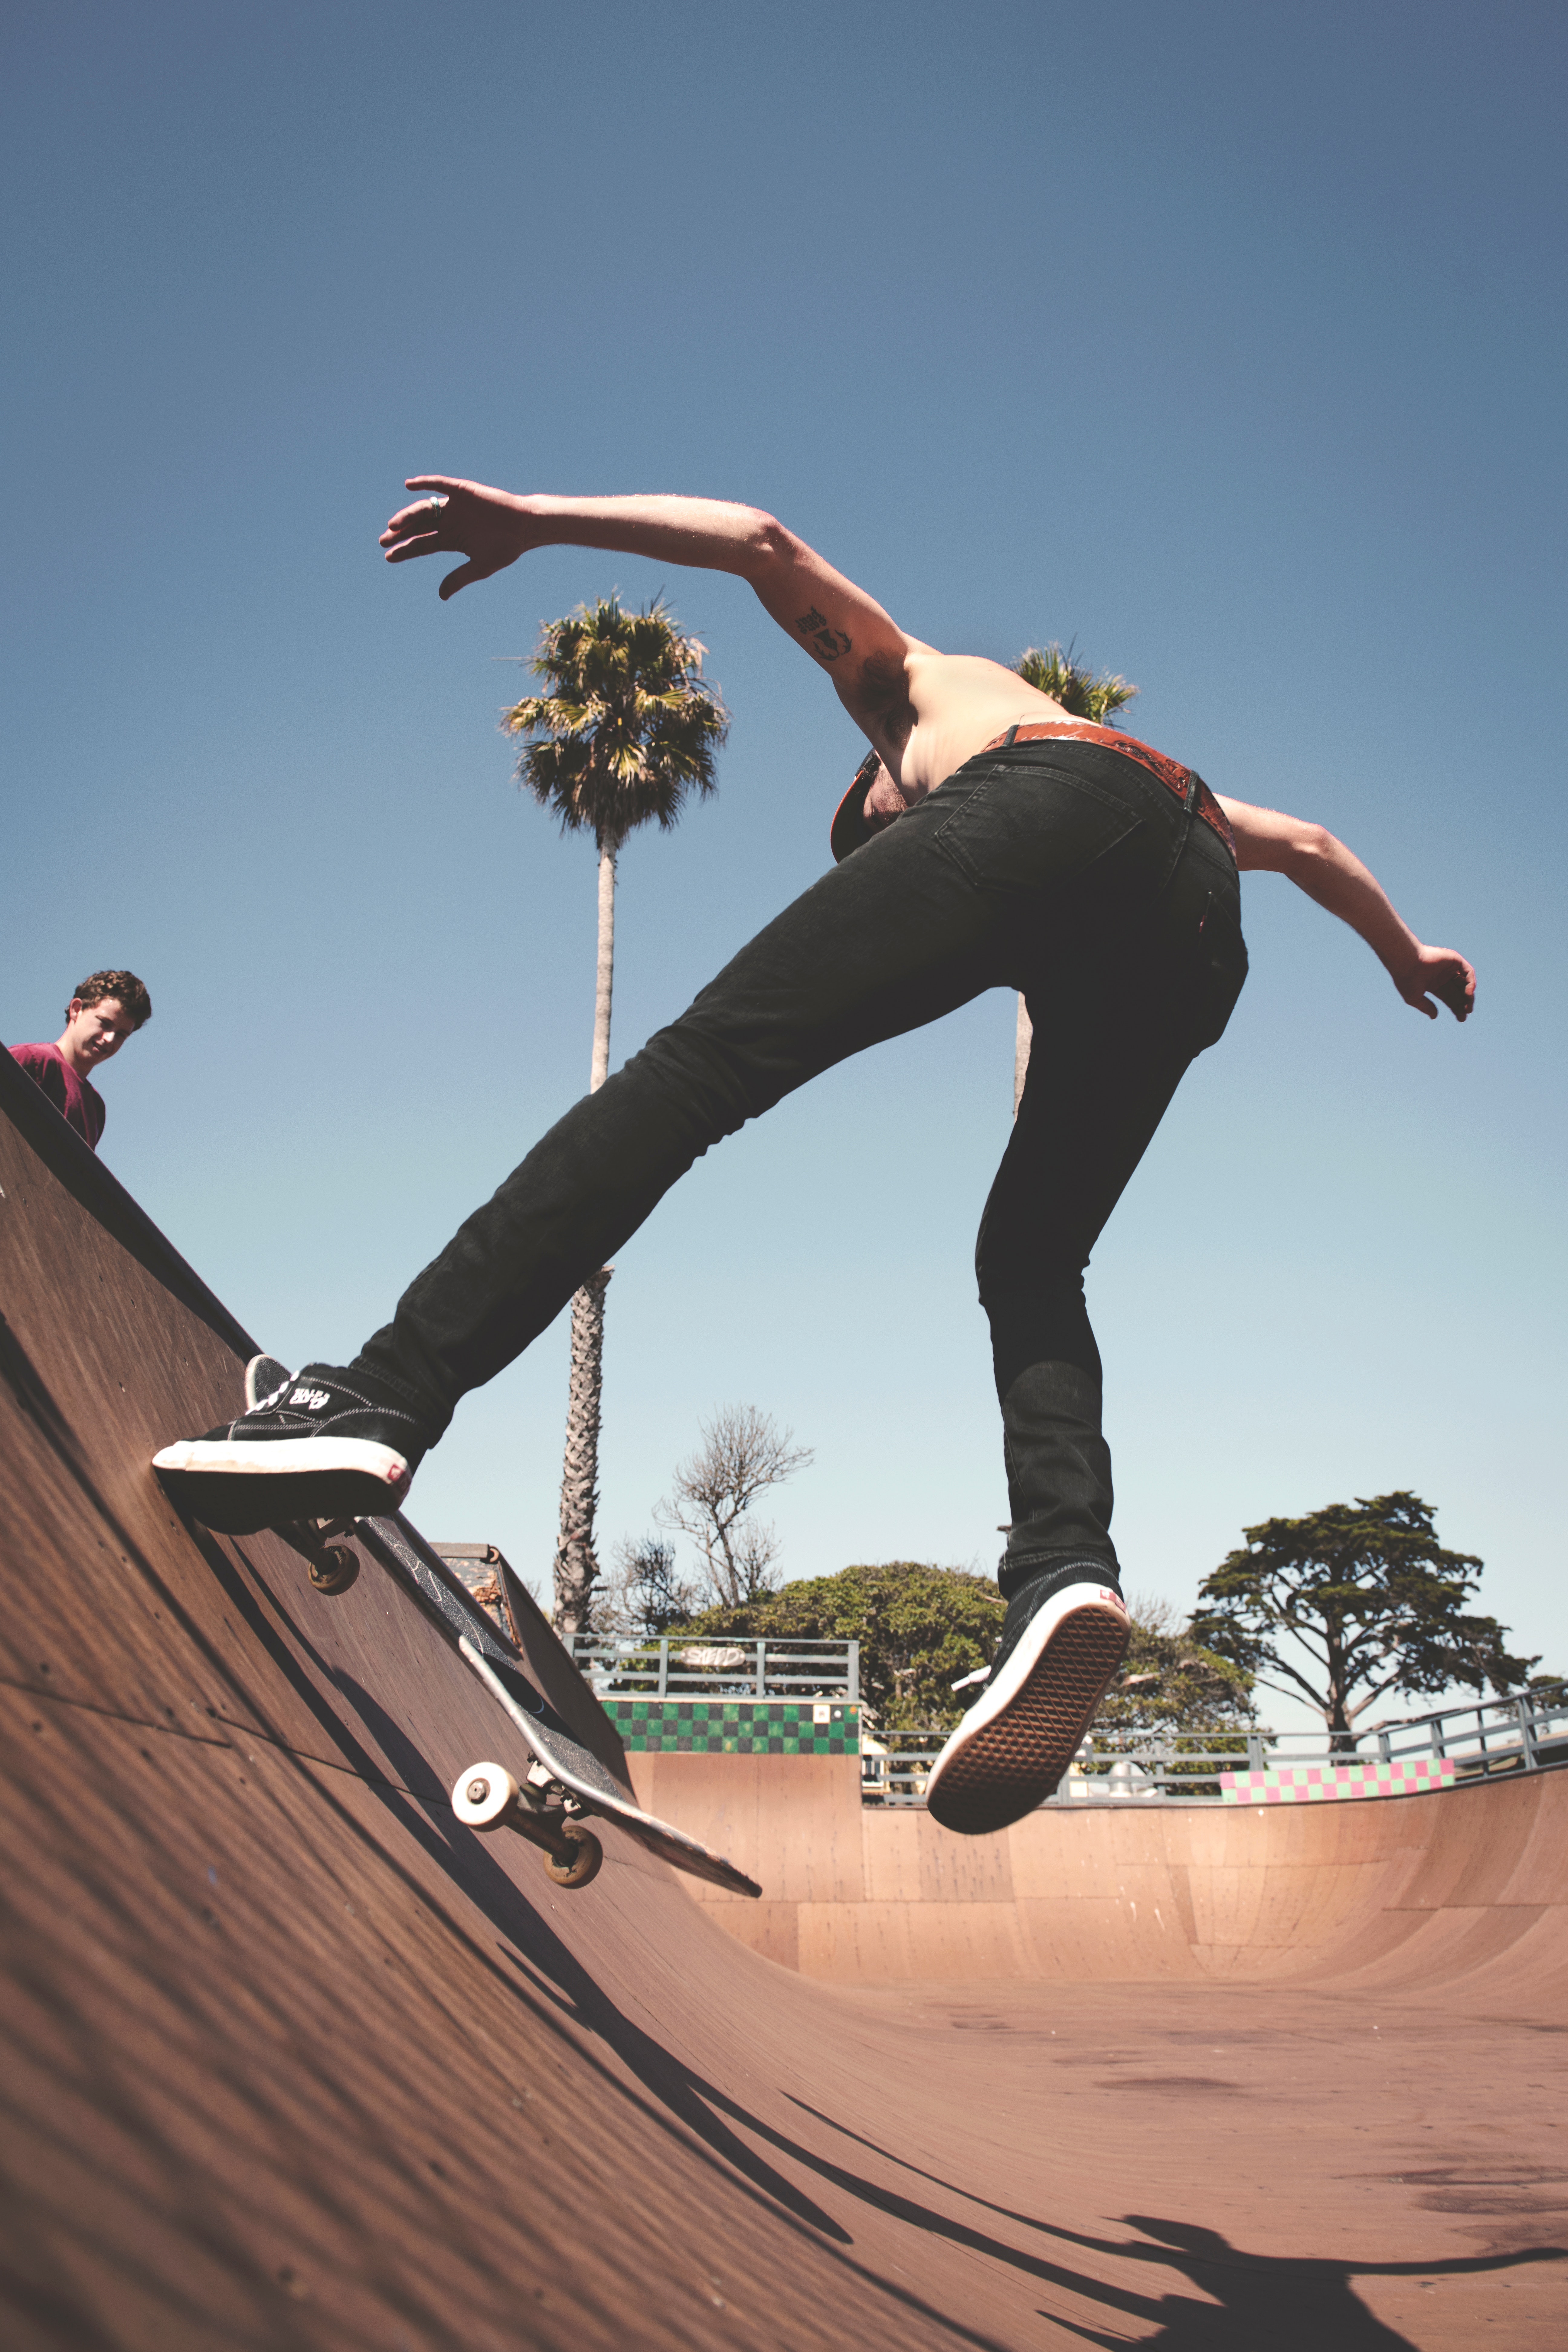 Low angle photo of a person skateboarding